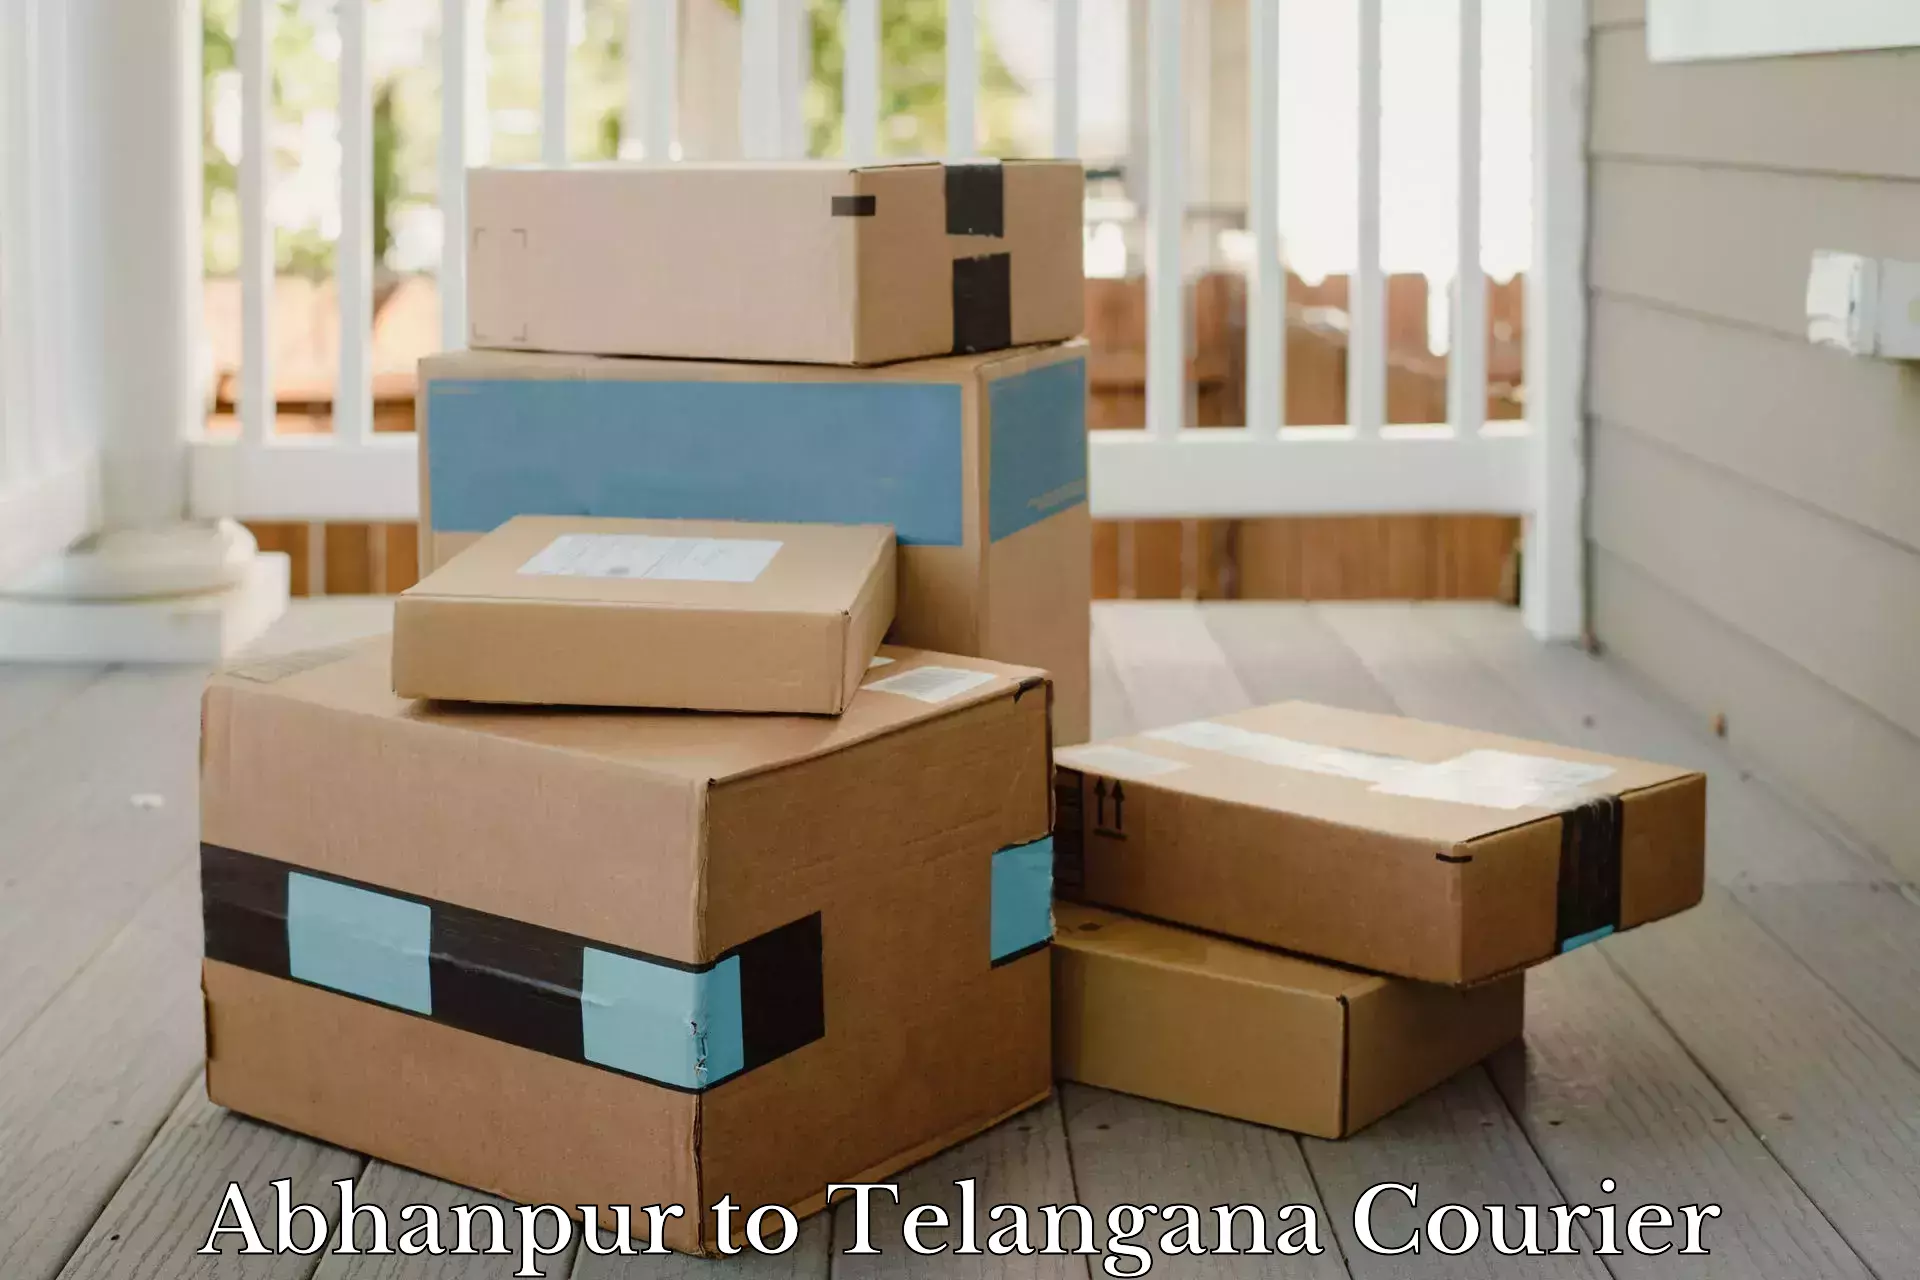 Nationwide delivery network Abhanpur to Rangareddy